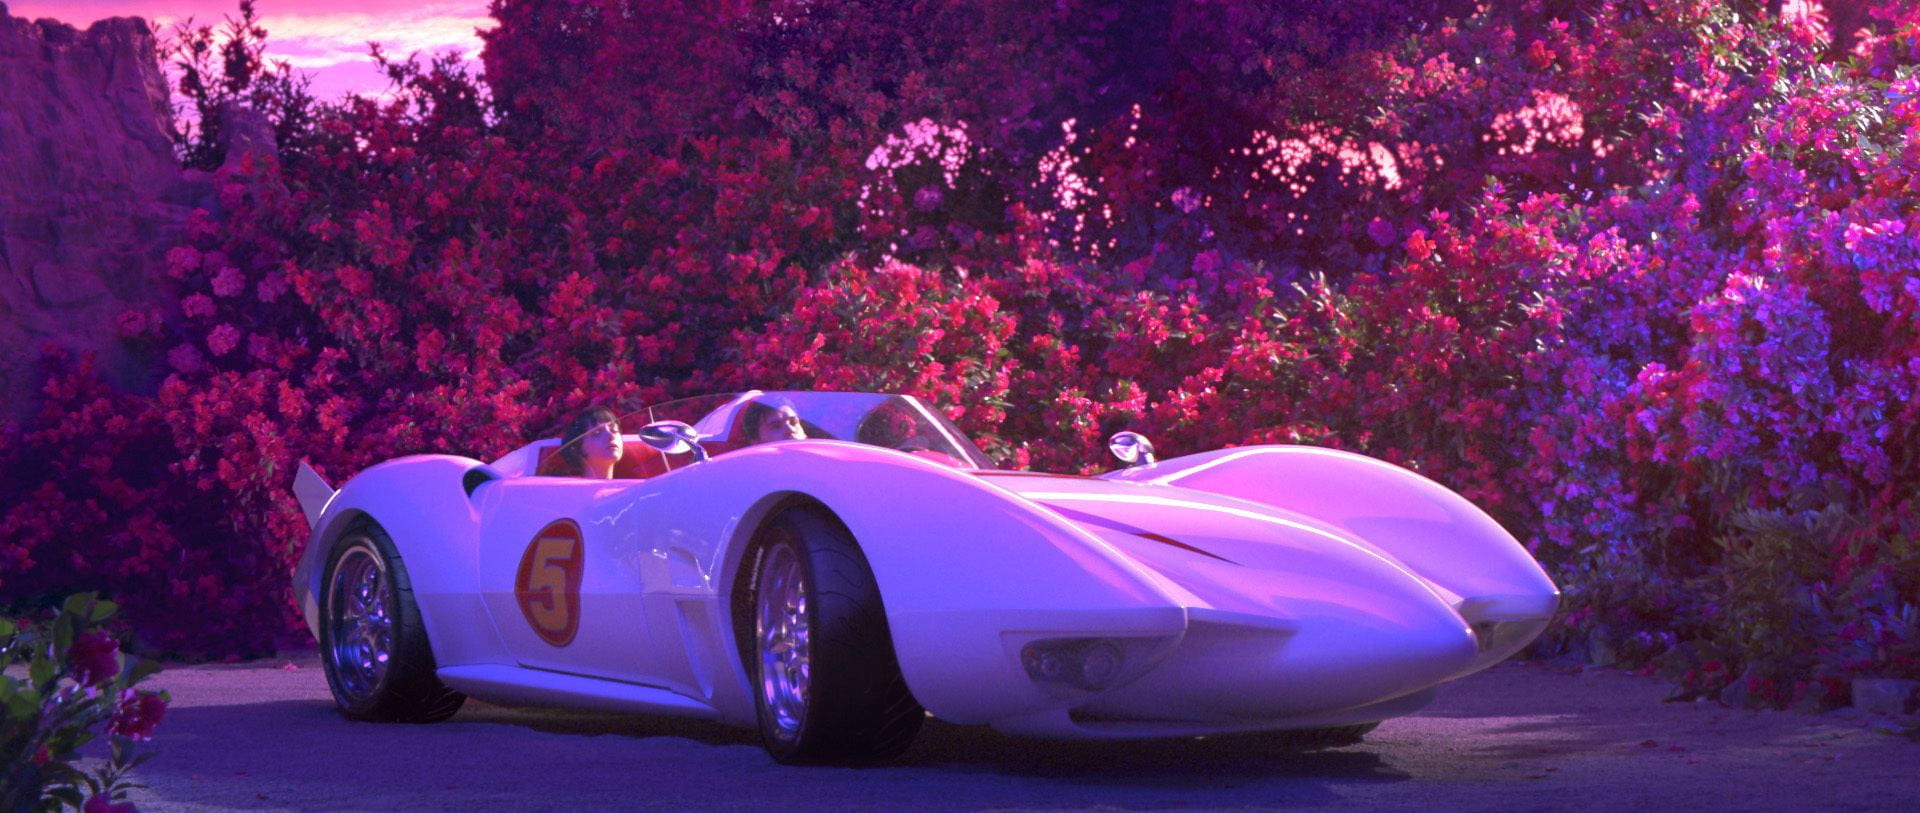 A shot of Christina Ricci and Emile Hirsch in Speed Racer's car